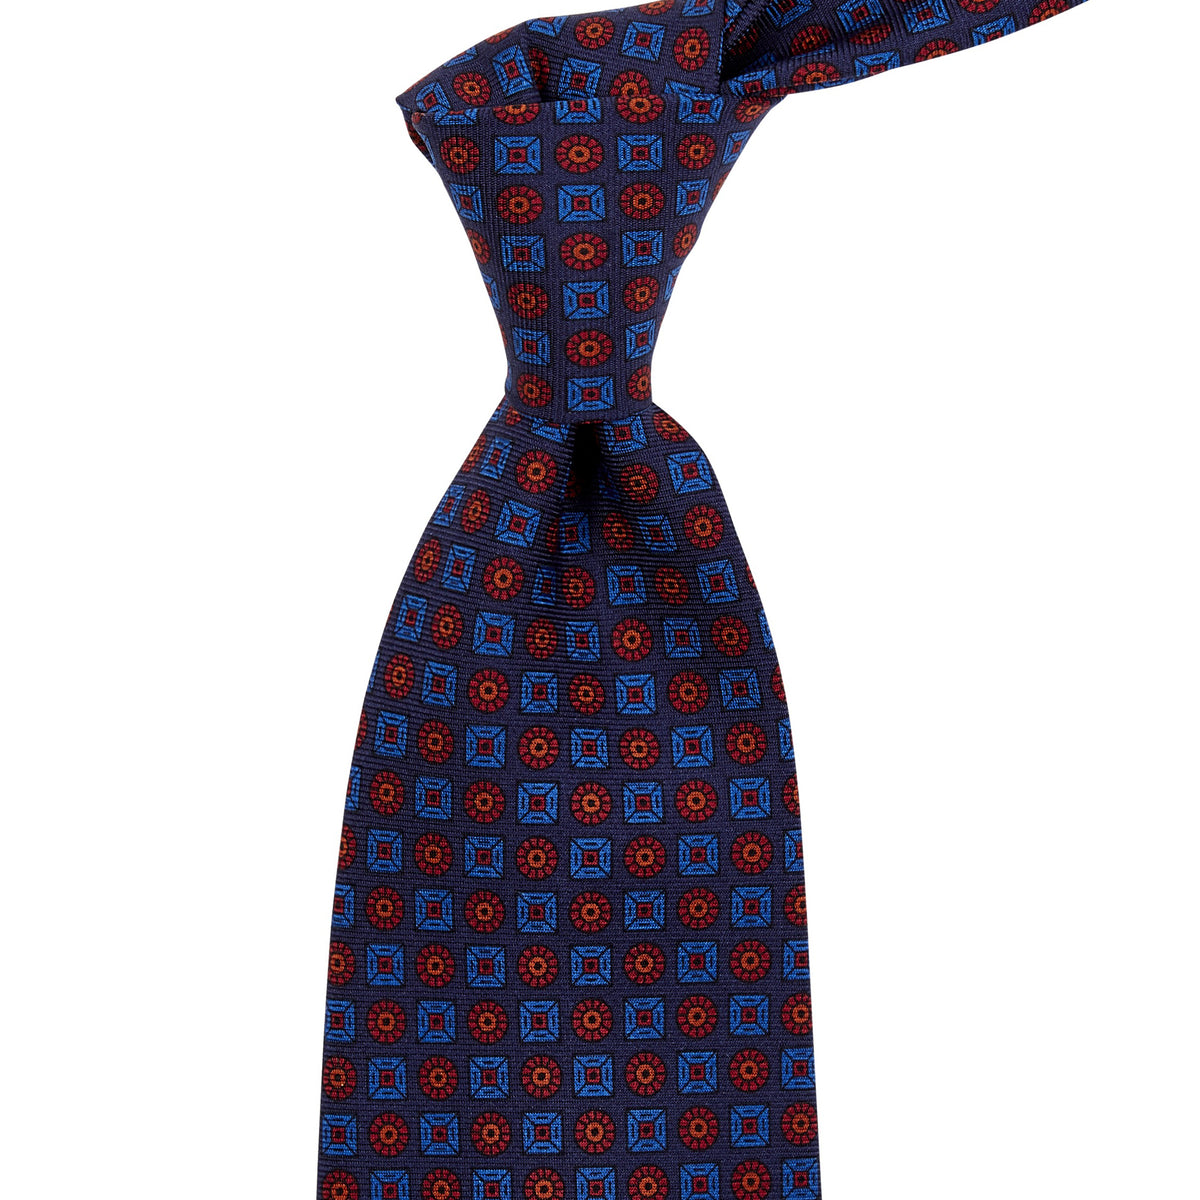 A Sovereign Grade Navy Ancient Madder Tie from KirbyAllison.com handmade in the United Kingdom with a blue and red pattern.